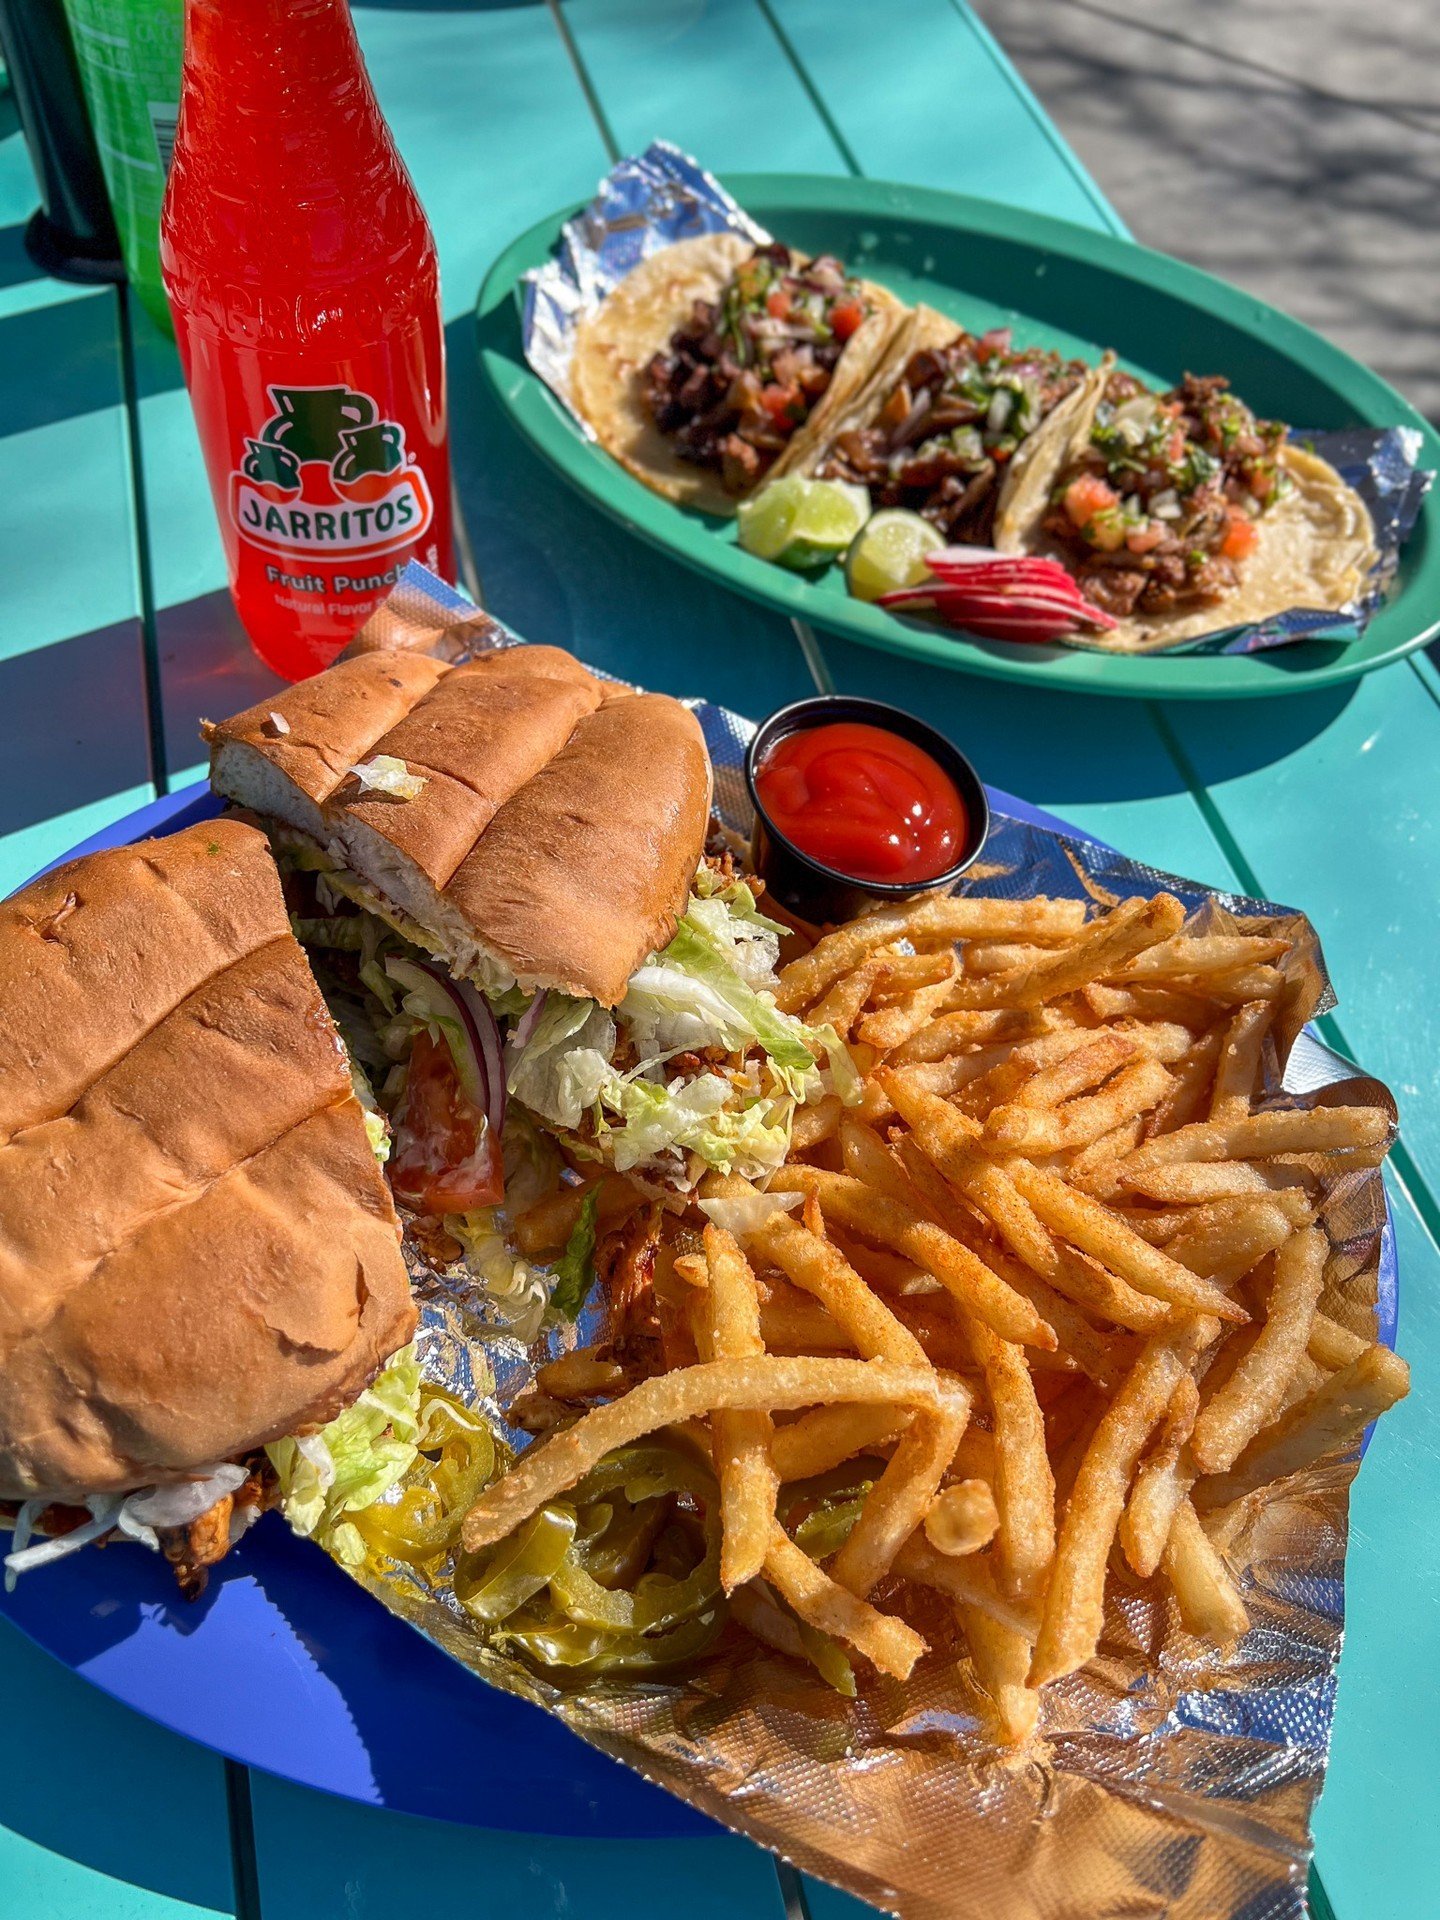 Pov: You ordered all your favorites 🤩

#oraletacobar #taqueria #southernpines #mexicanfood #comidamexicana #southernpinesfood #southernpinesn